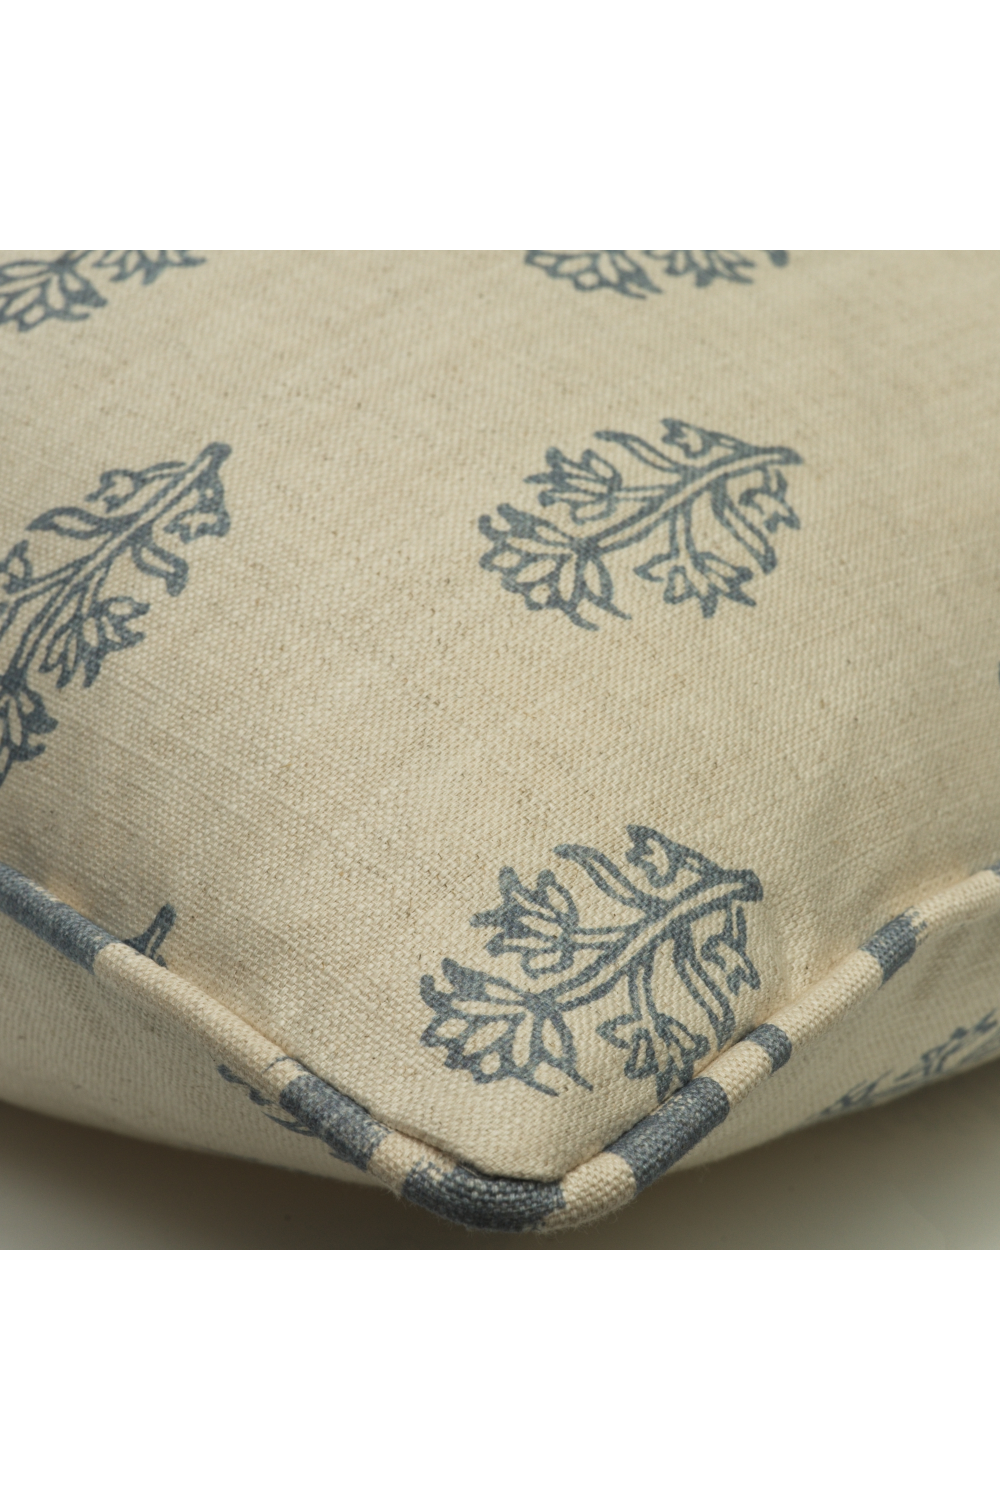 Indian Floral Cushion | Andrew Martin Buttercup | Oroa.com